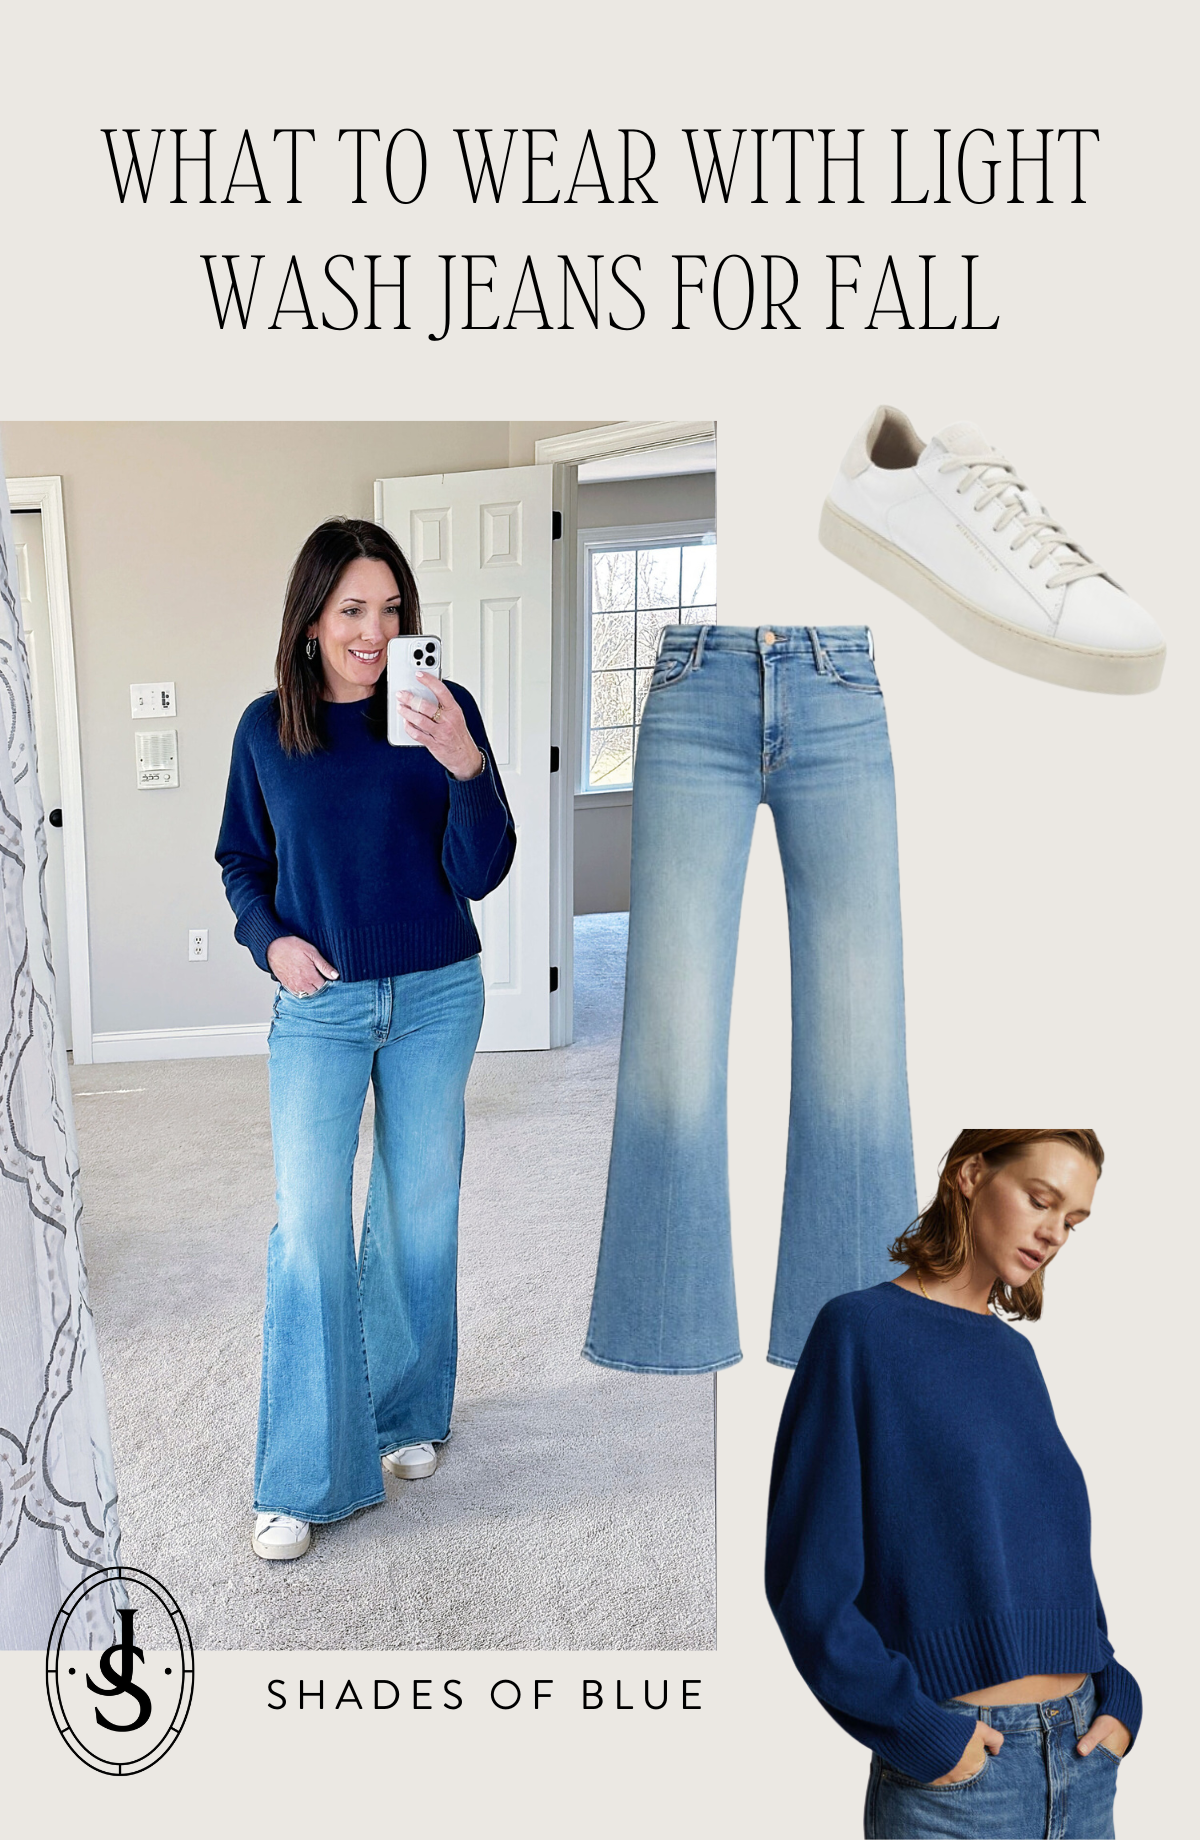 What to Wear with Light Wash Jeans for Fall: Dark Blue